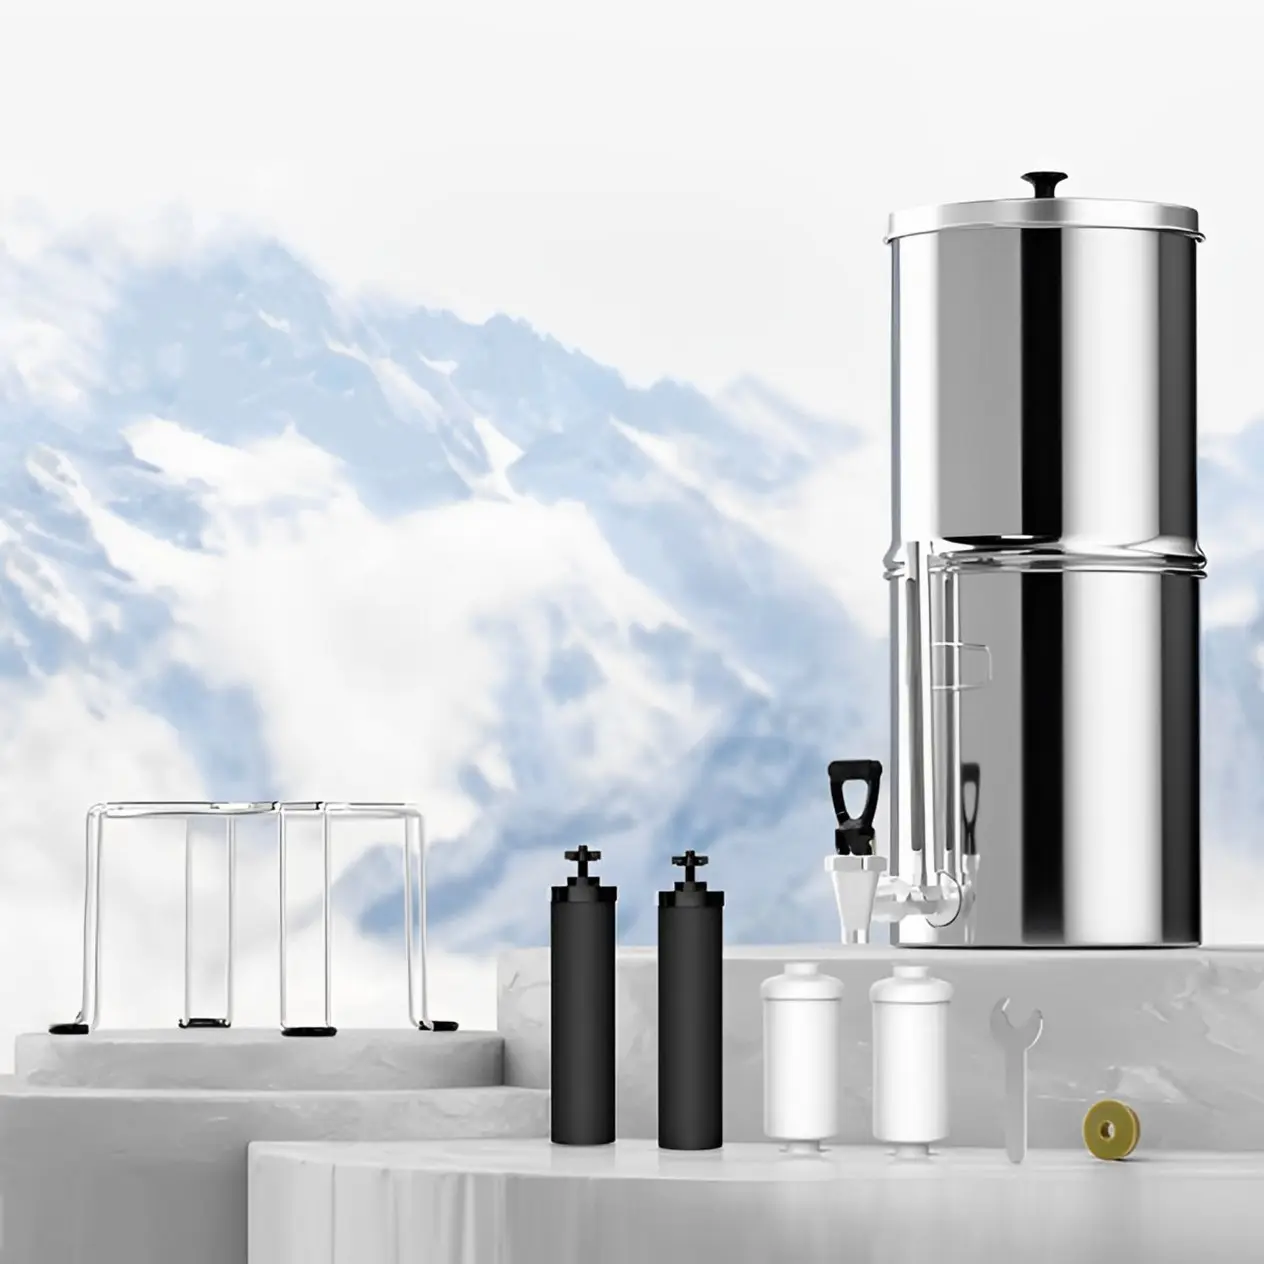 Outdoor Water Filtration portable Stainless Steel gravity filter purificador de agua Camping water filter gravity water filter